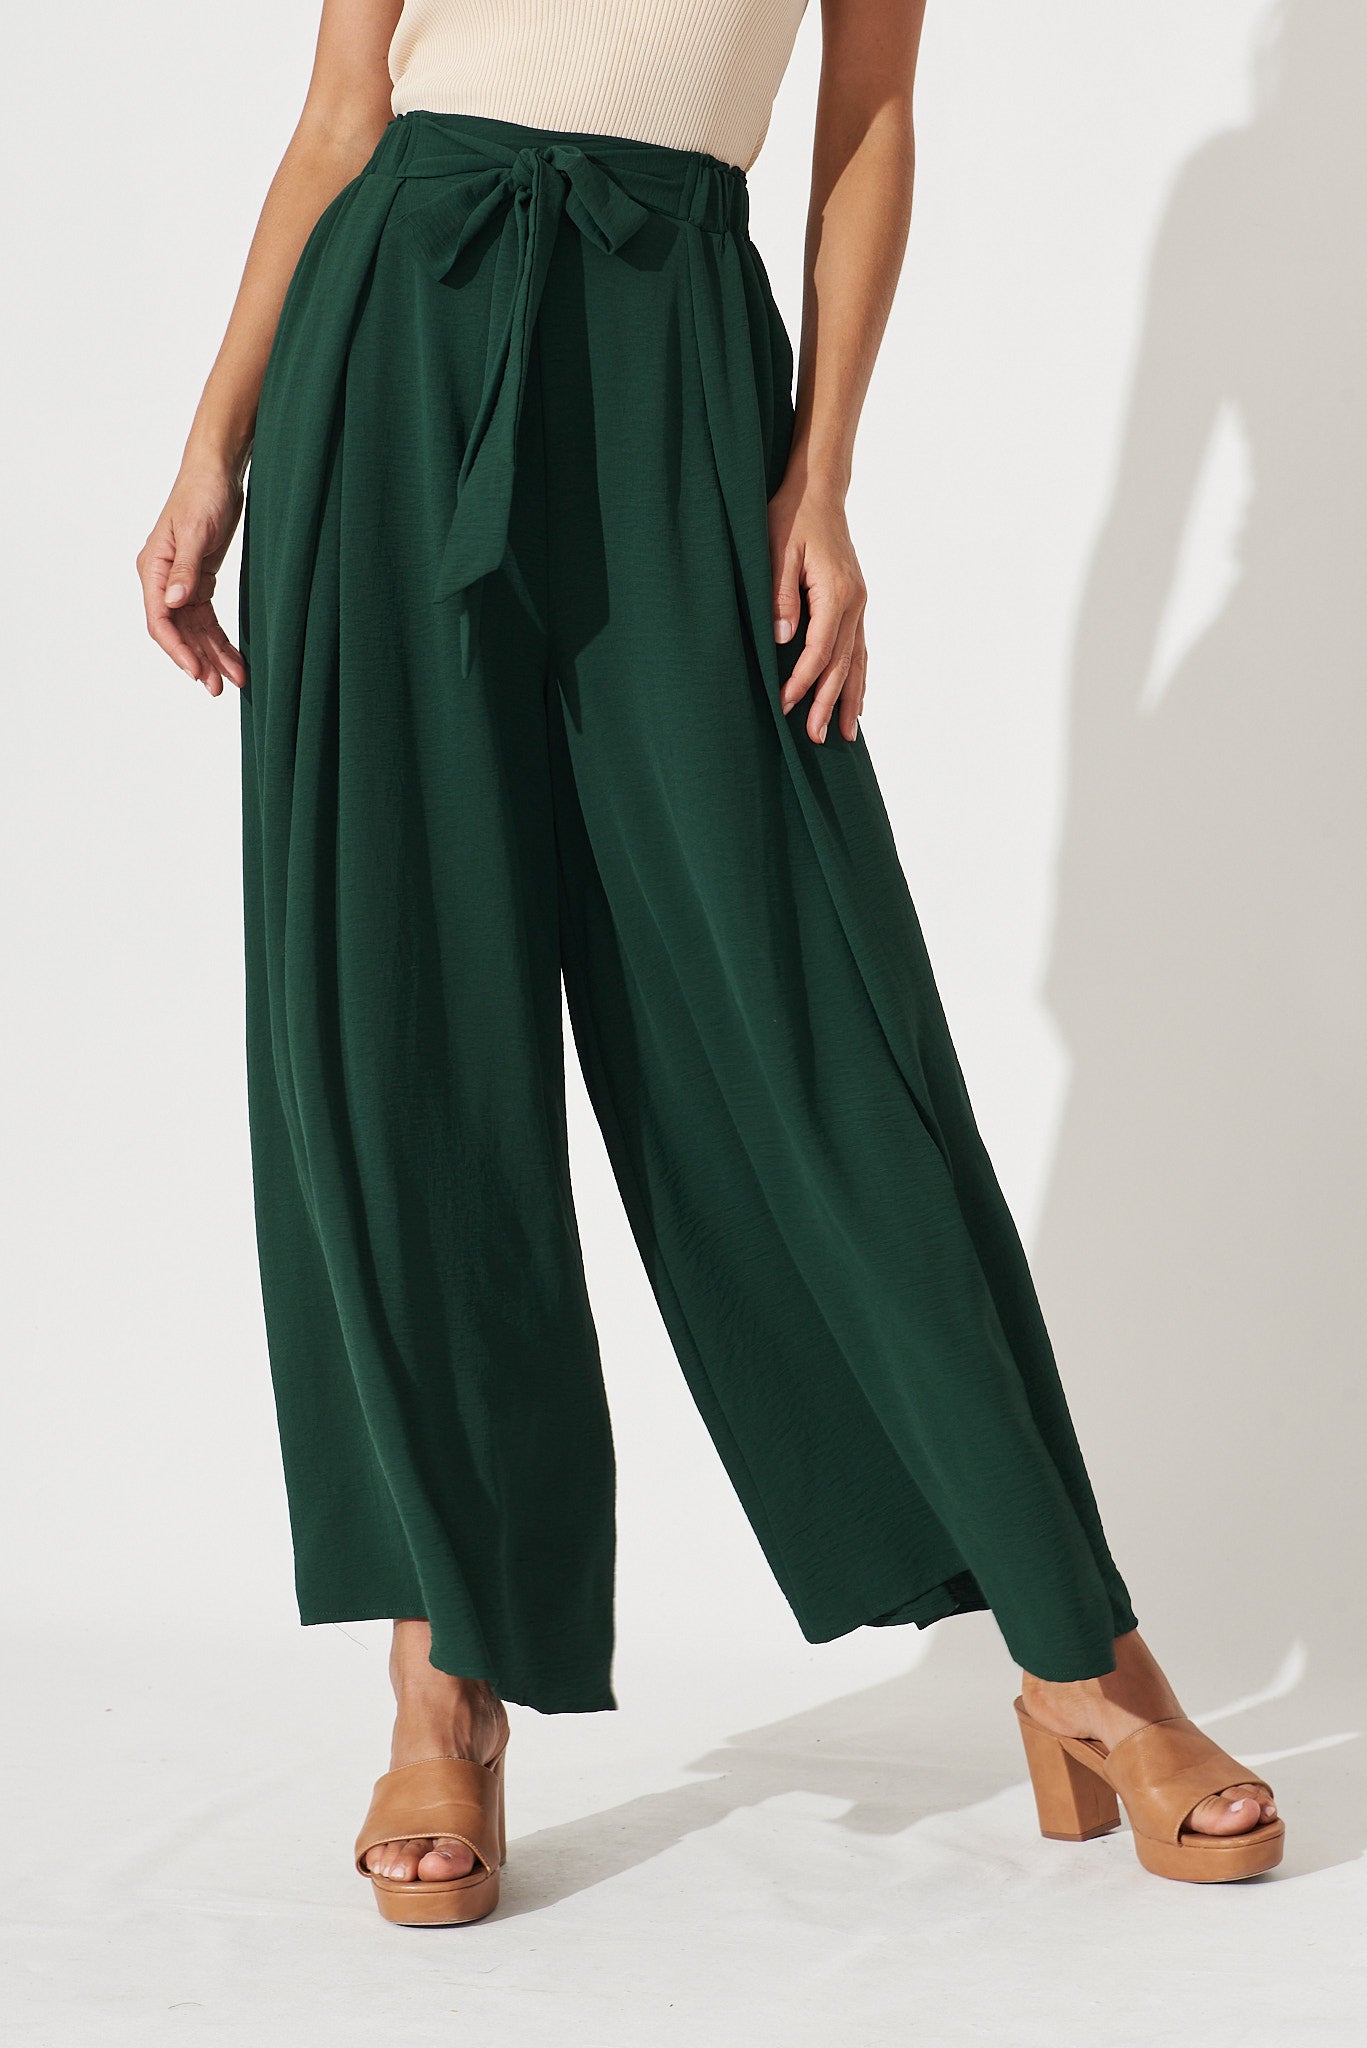 Page Pants In Emerald - front